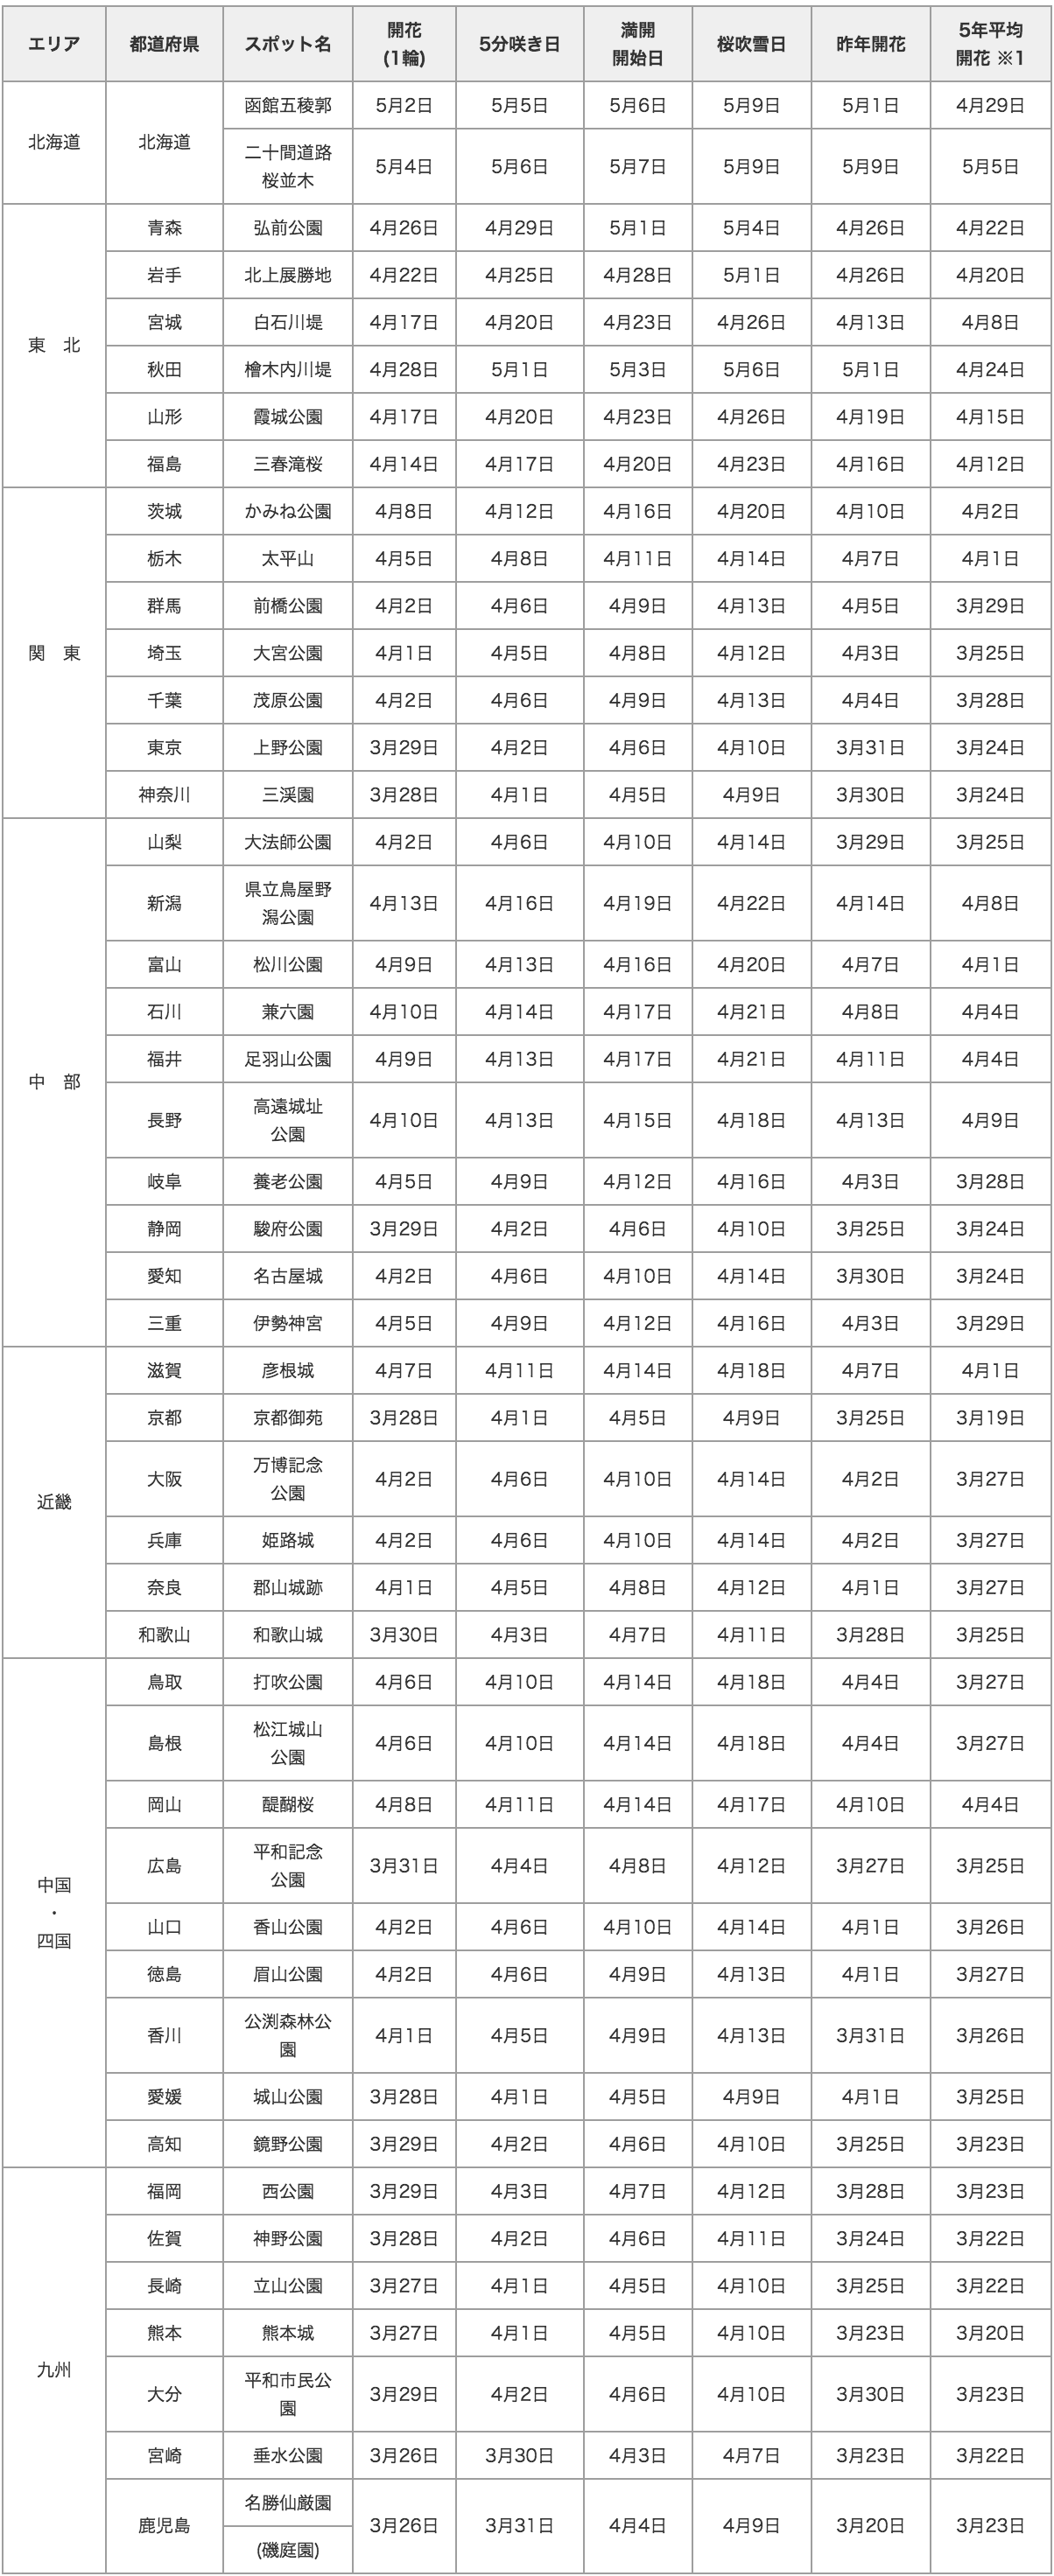 20120305_1_table1